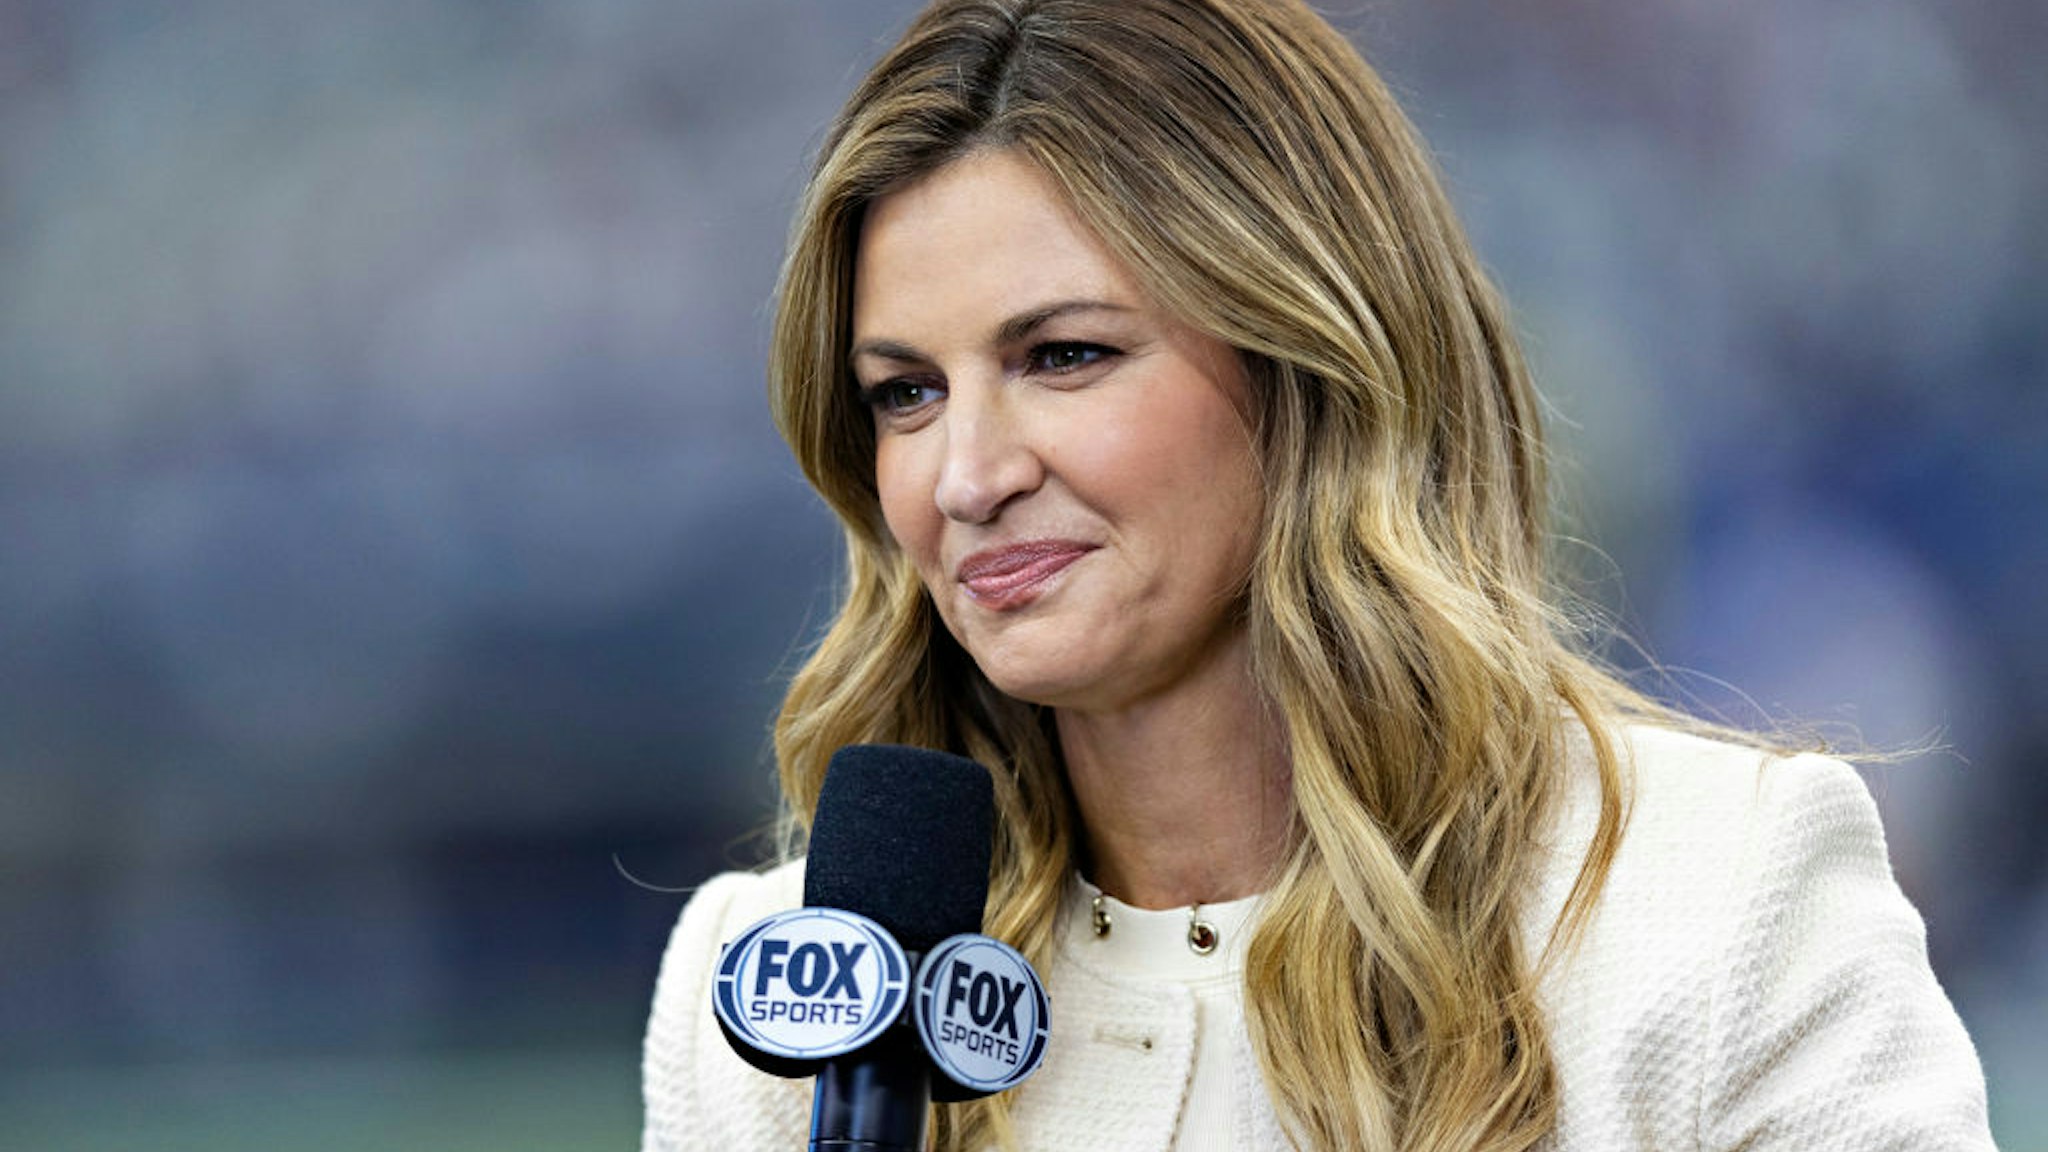 ARLINGTON, TEXAS - OCTOBER 2: Fox Sports sideline reporter Erin Andrews on the field before a game between the Washington Commanders and the Dallas Cowboys at AT&amp;T Stadium on October 2, 2022 in Arlington, Texas. The Cowboys defeated the Commanders 25-10. (Photo by Wesley Hitt/Getty Images)